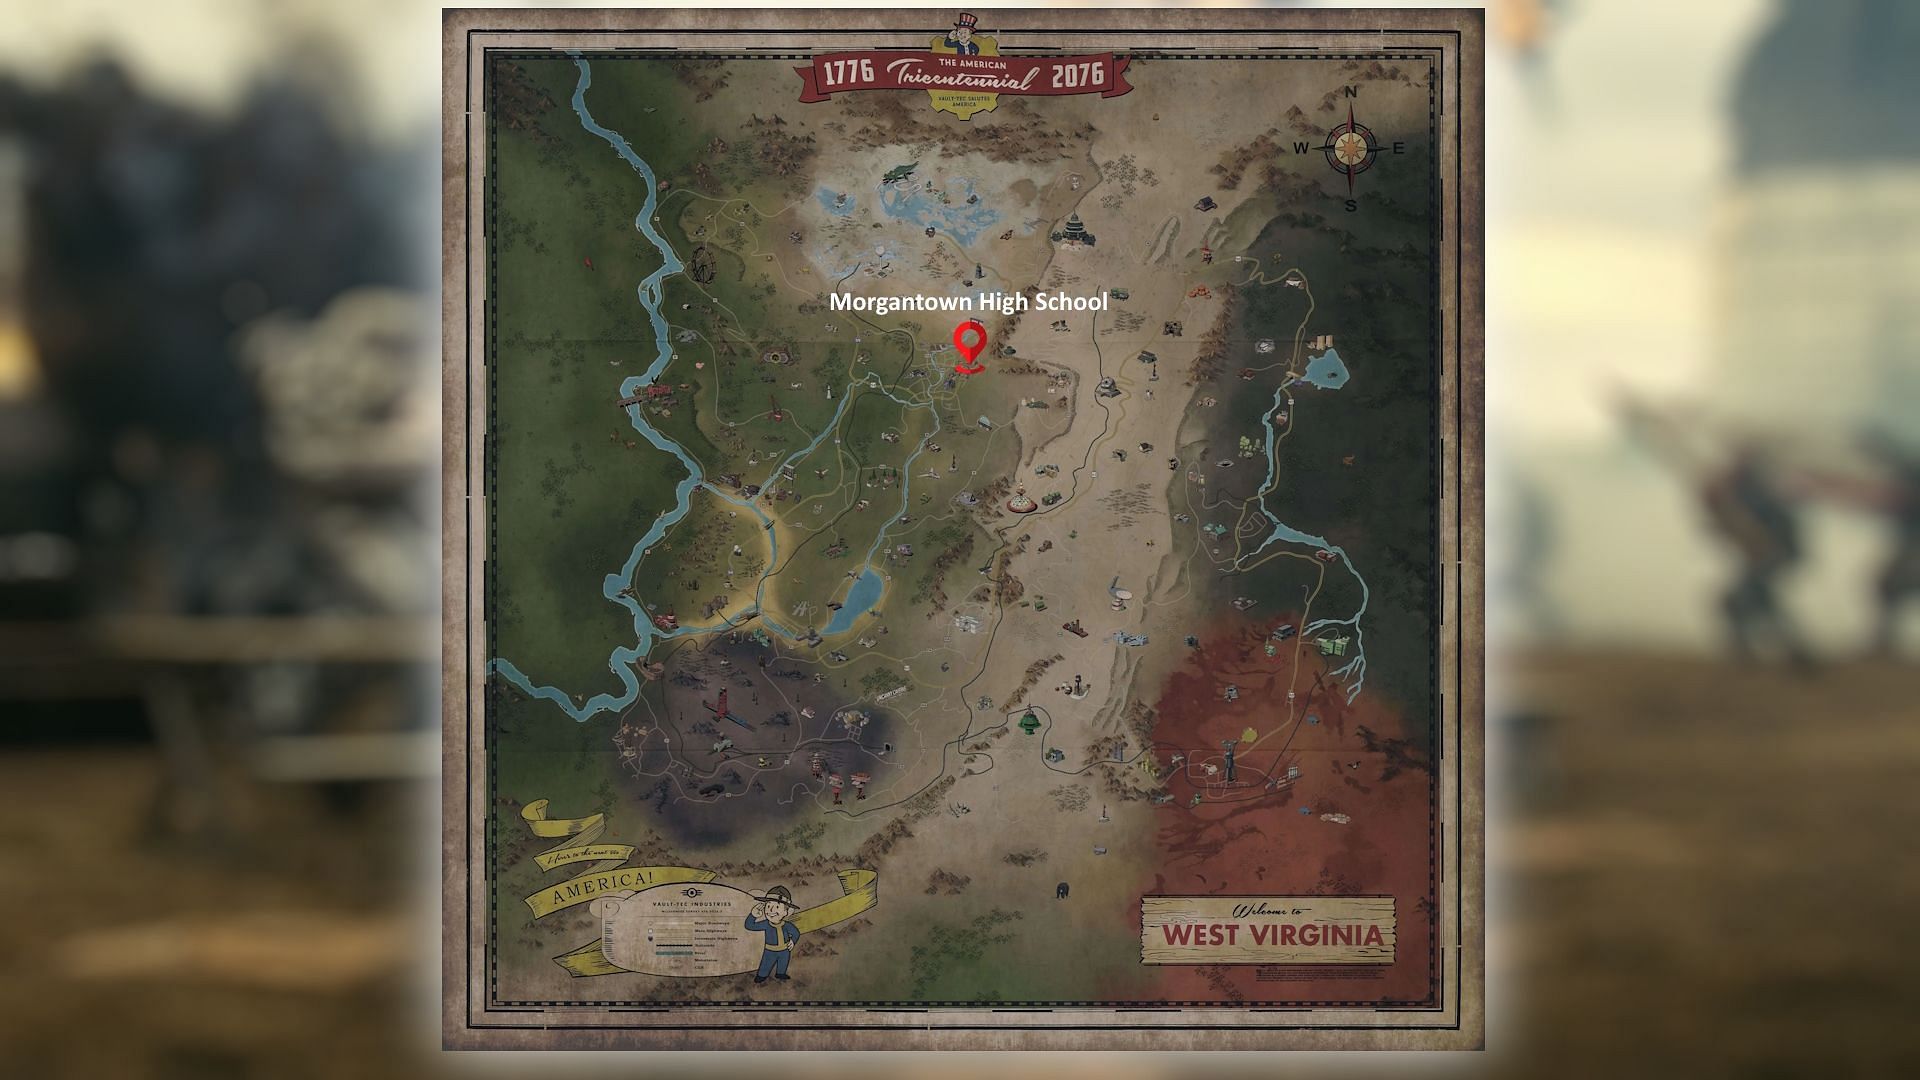 The Morgantown High School is located in the Forest region (Image via Bethesda Game Studios)